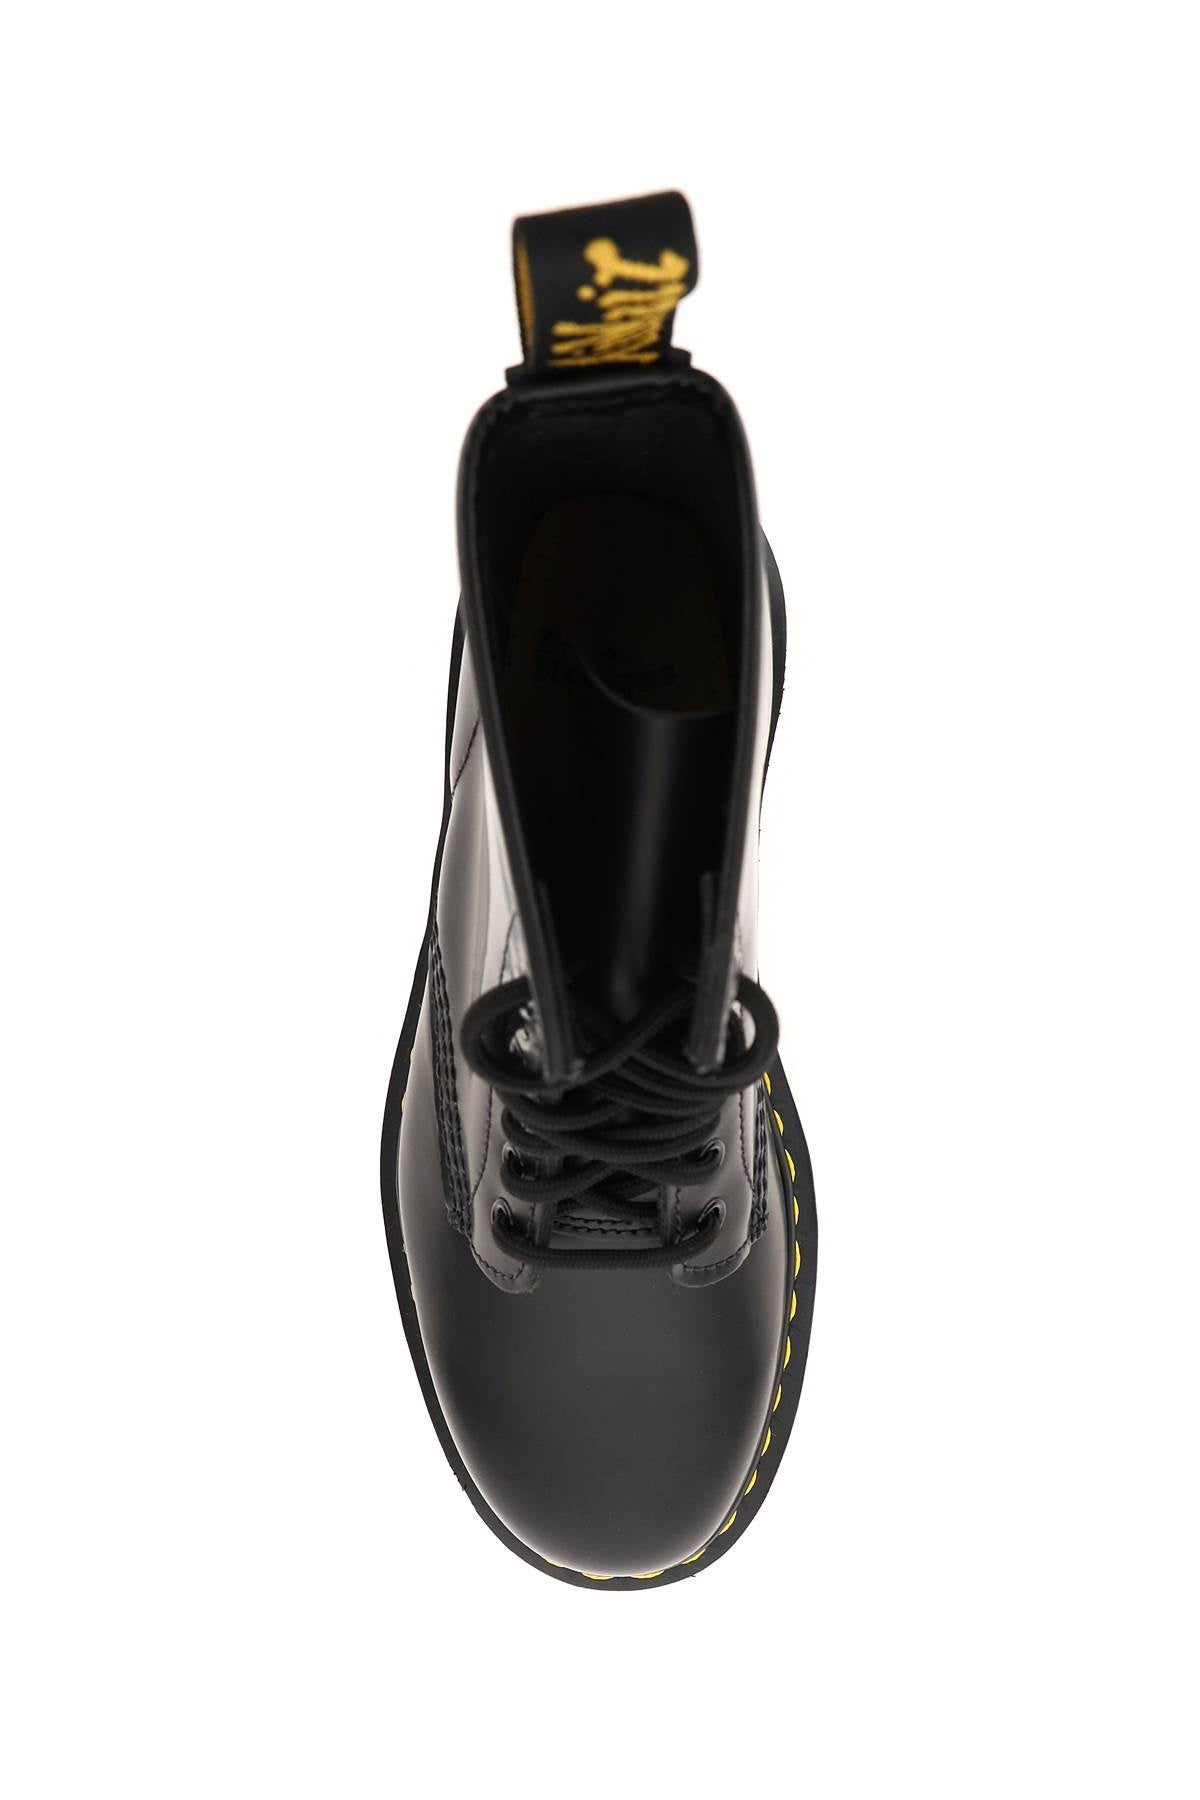 Dr.martens 1460 smooth leather combat boots-1